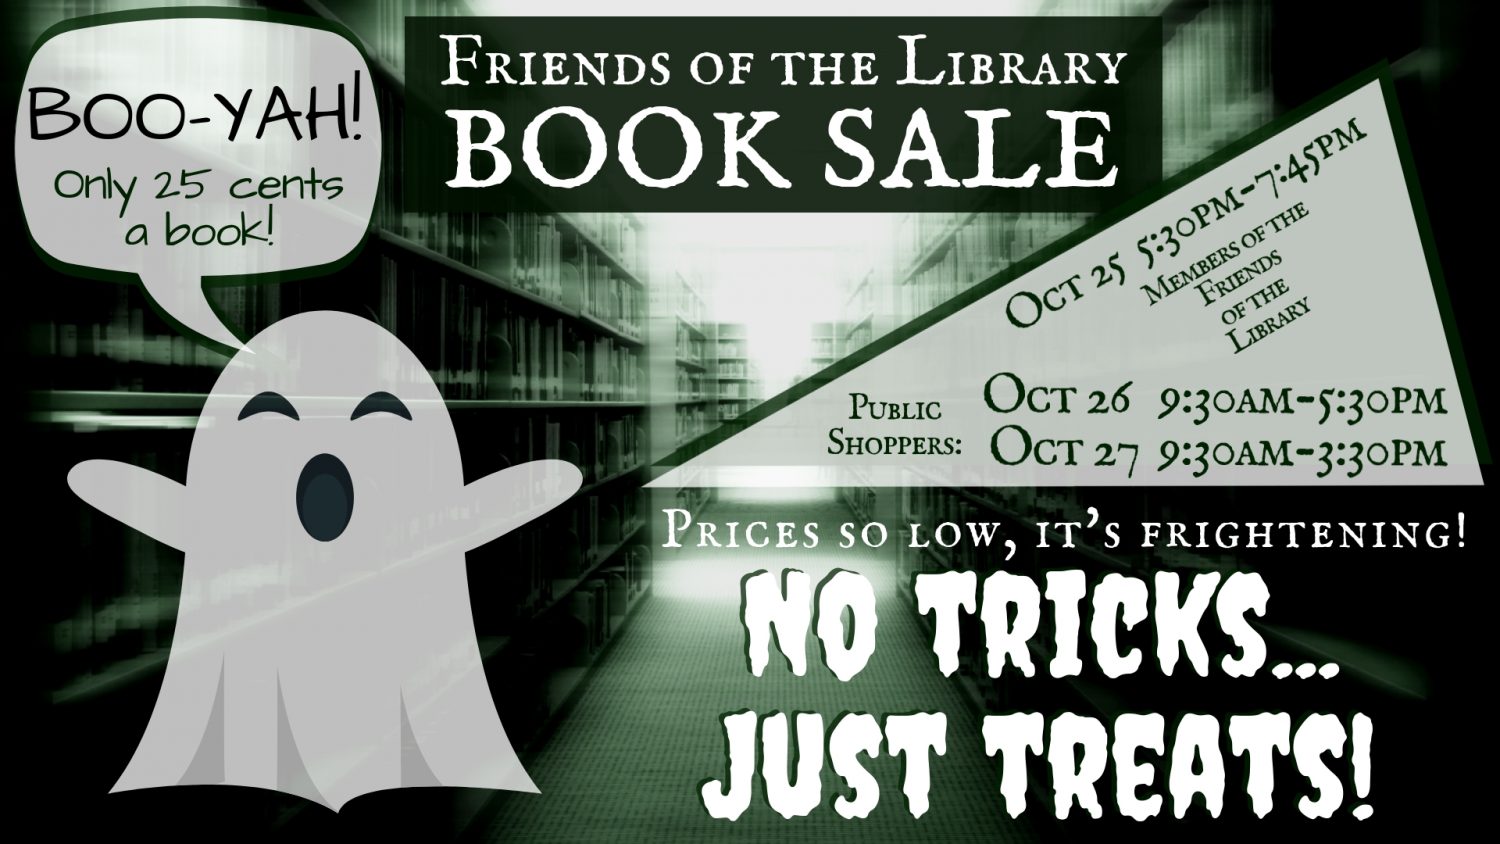 Friends of the Library putting on ‘ghoulishly low-priced’ book sale